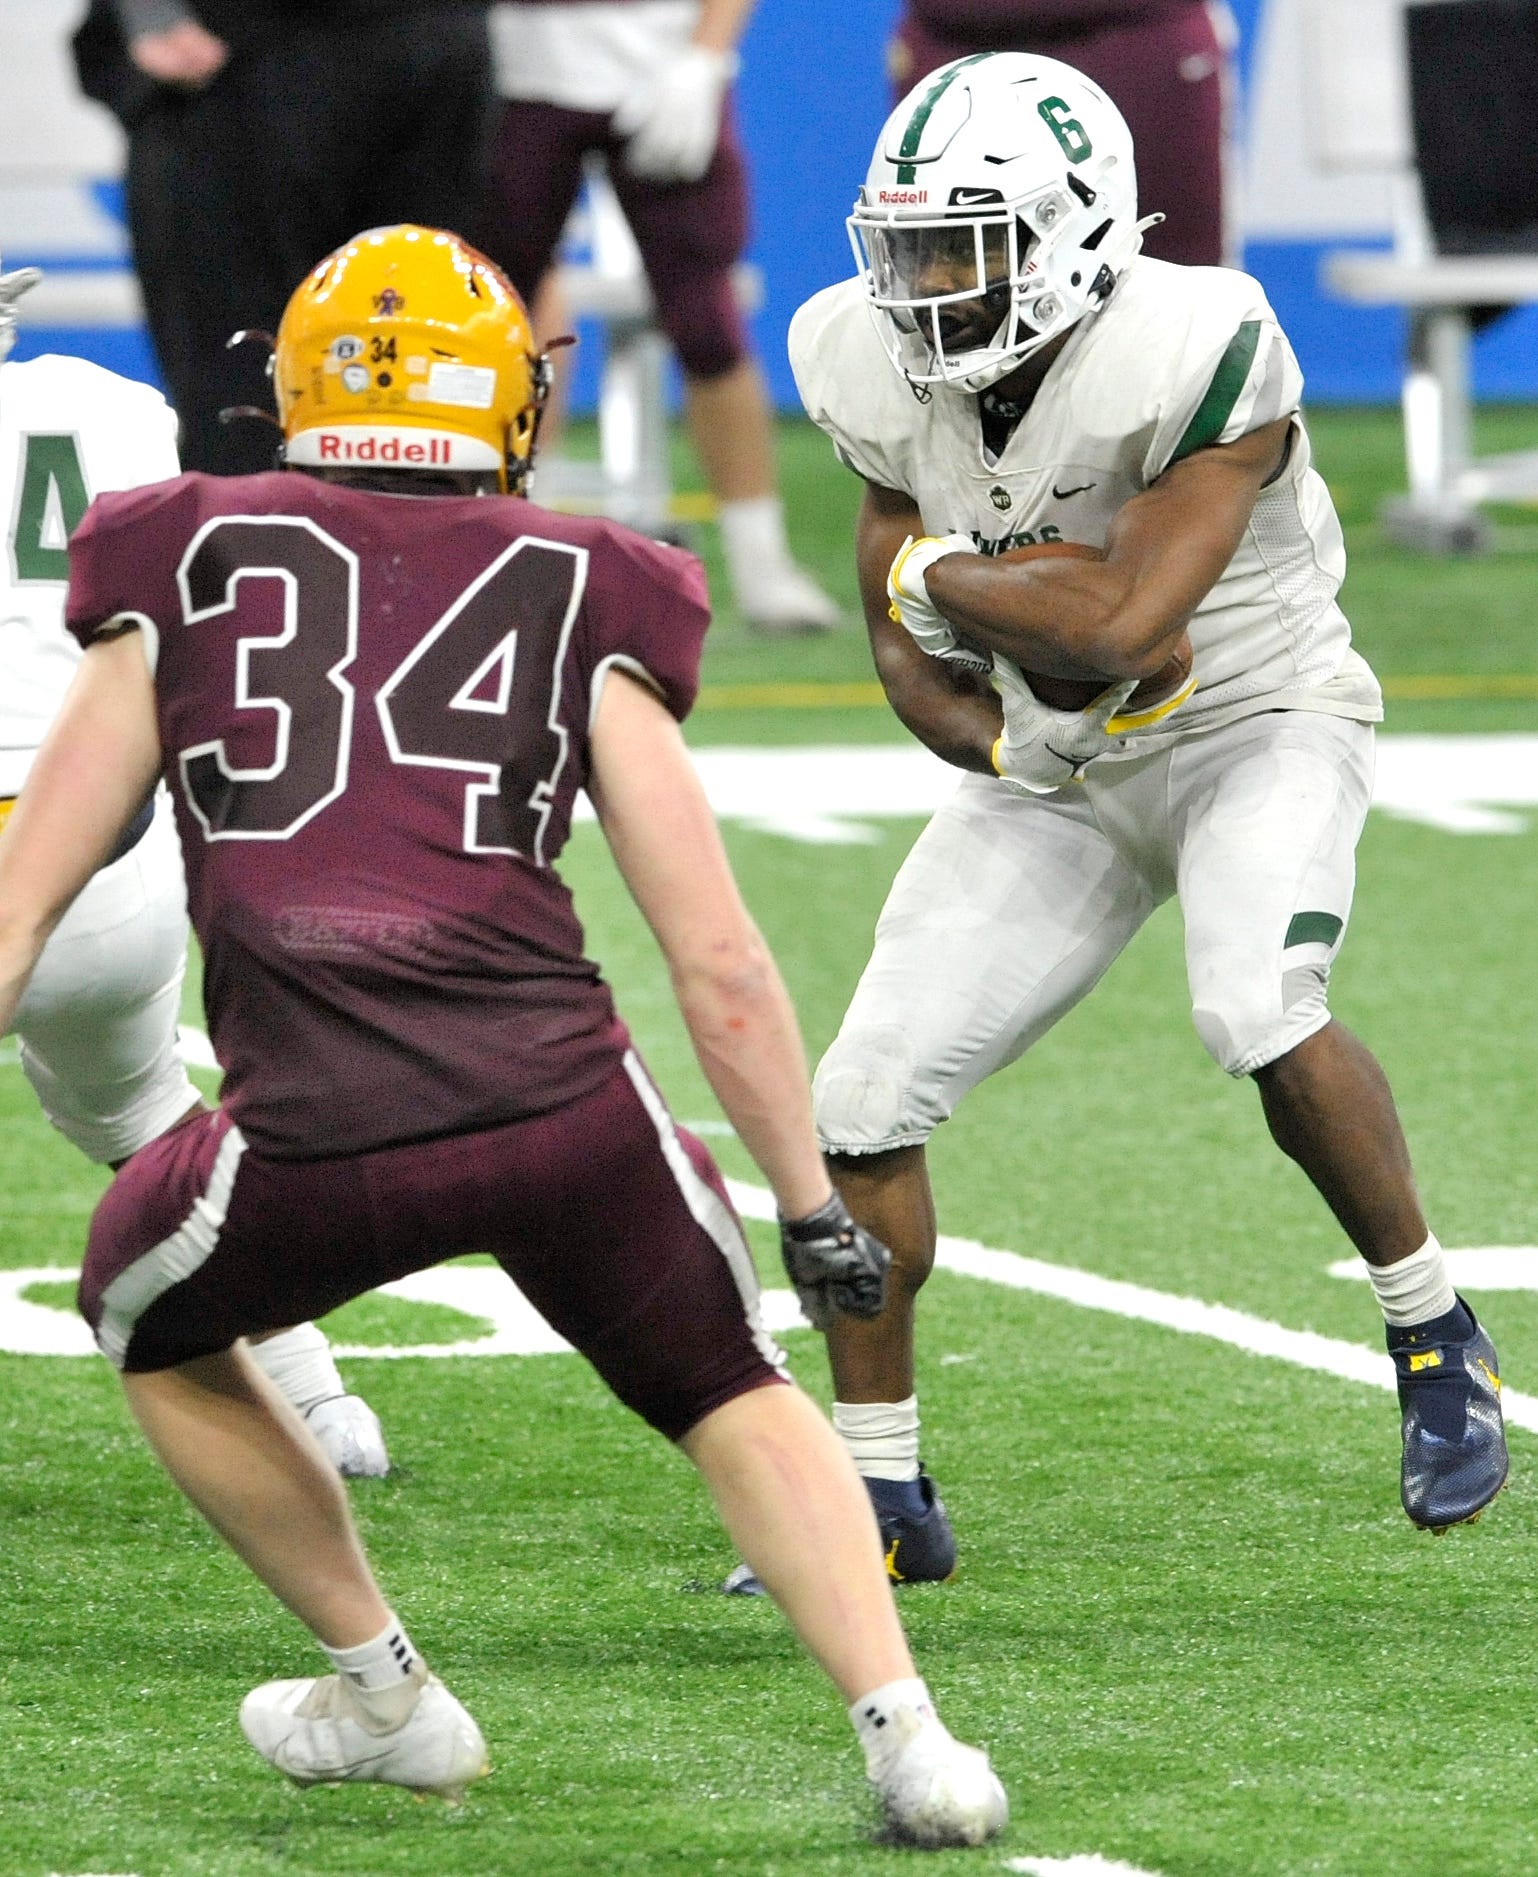 West Bloomfield's Donovan Edwards (6) protects the ball near the end of the third quarter as Davison's Payton Pizzala (34) closes in.